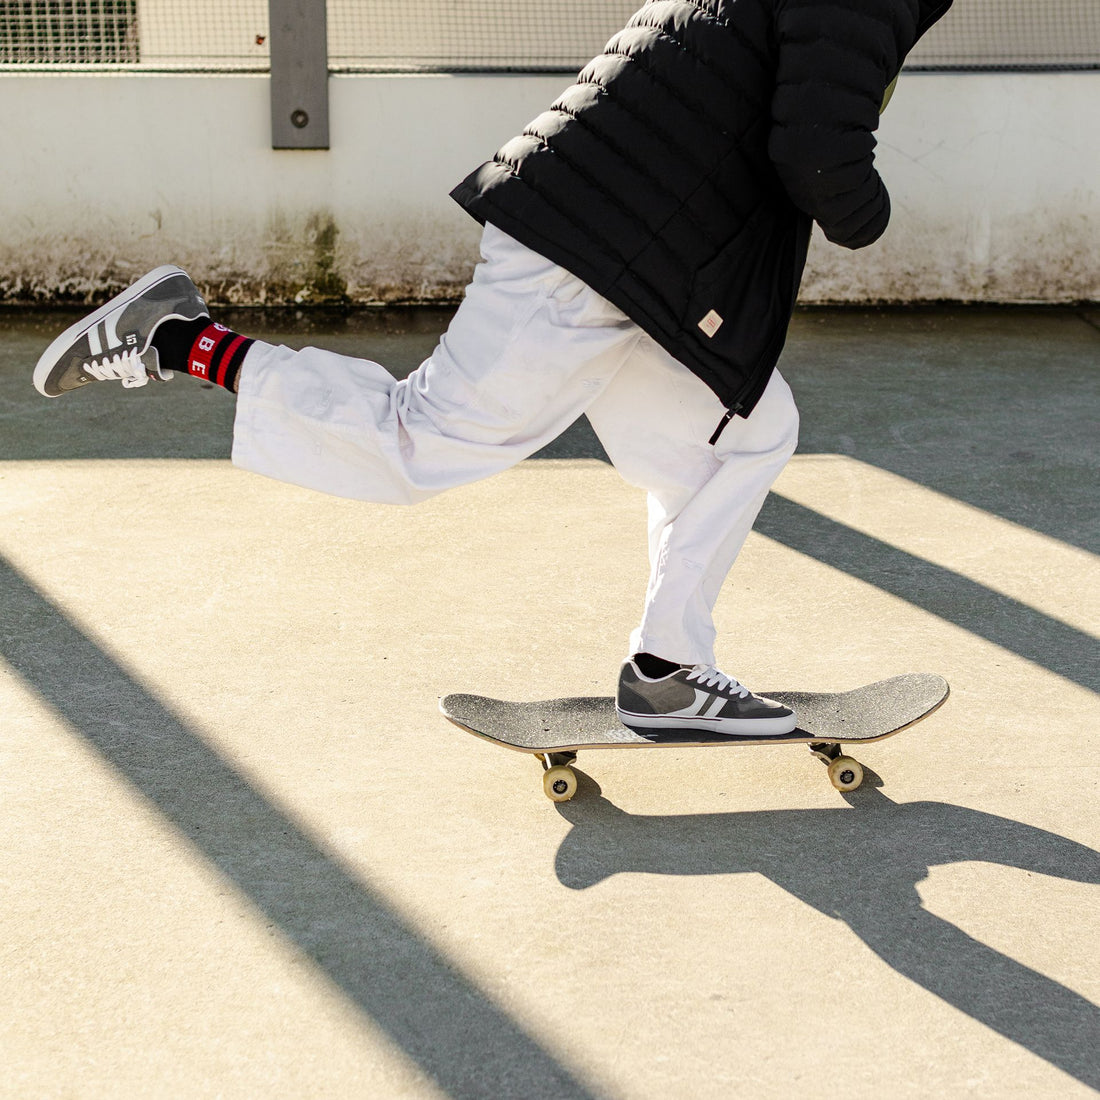 Skate wearing white jeans, Globe encore shoes and black Globe puffer jacket going for a skate